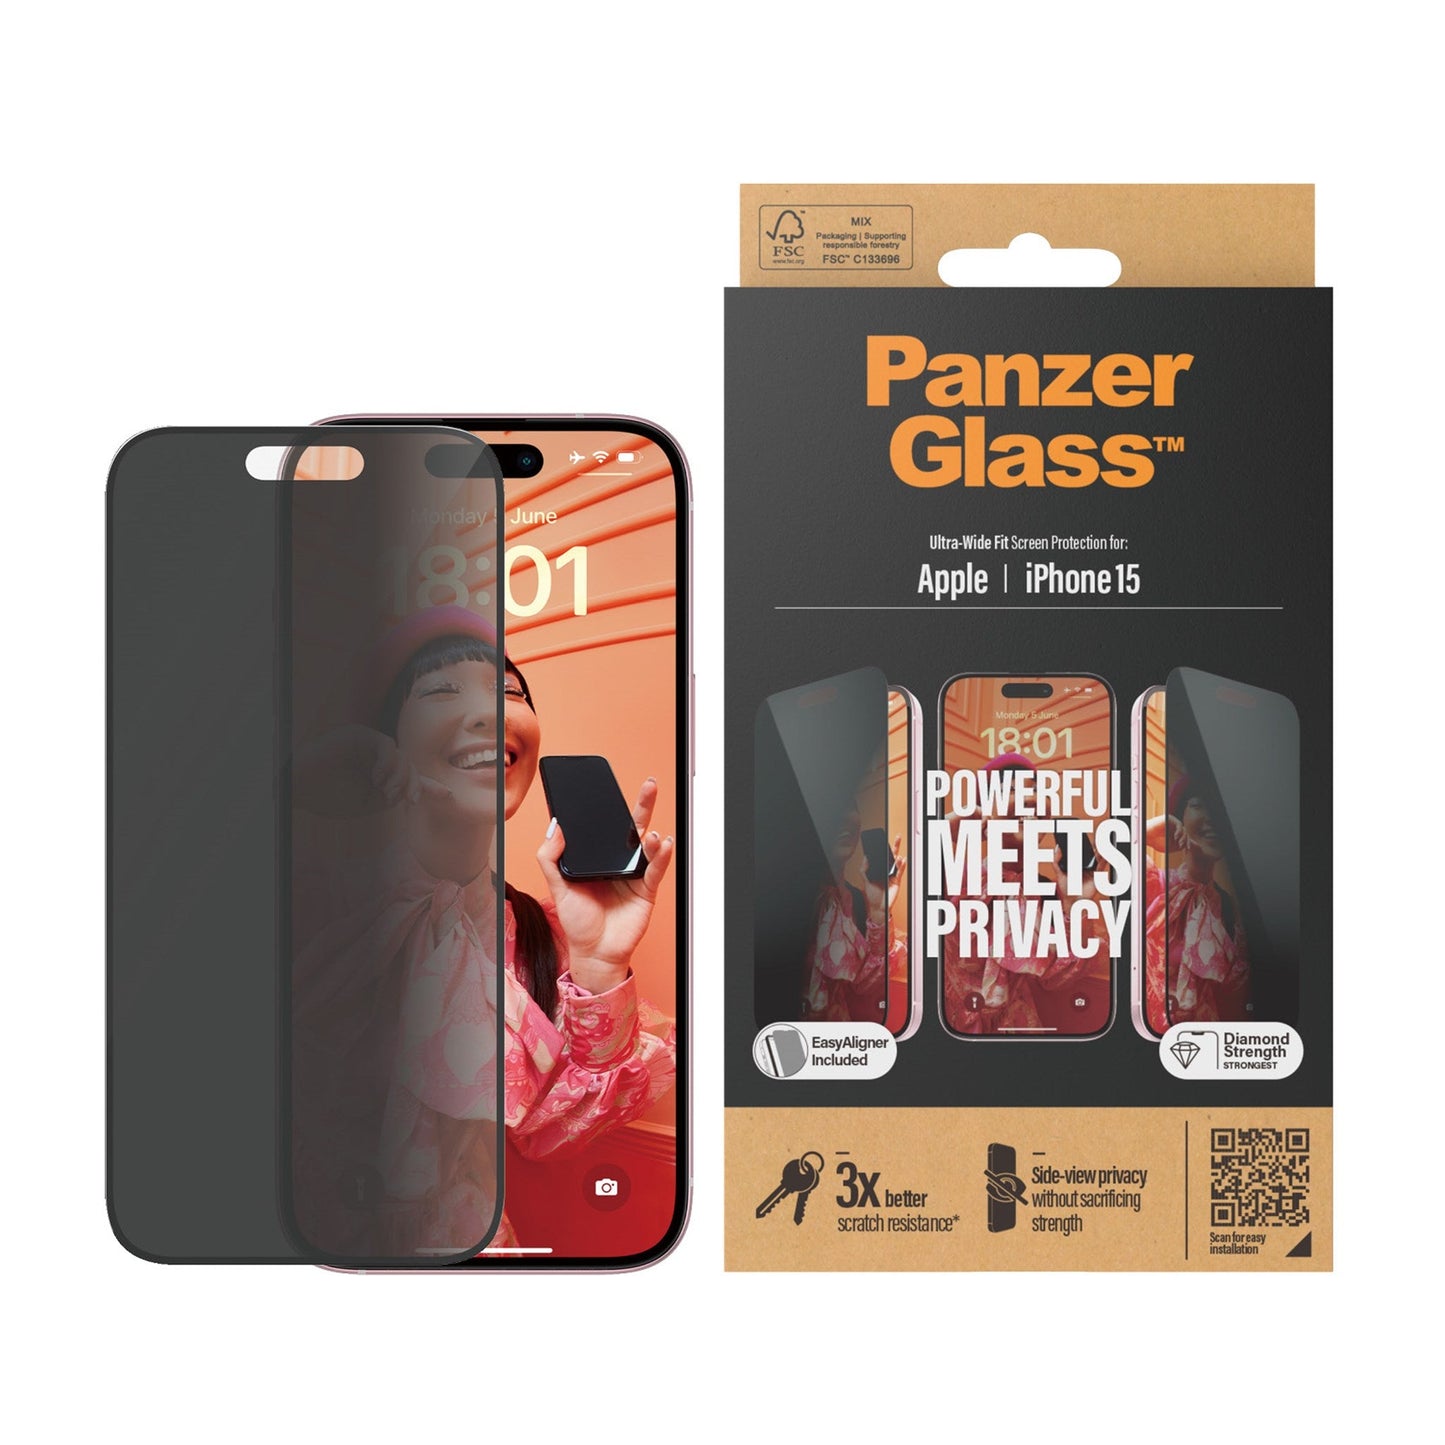 PanzerGlass Ultra Wide Fit Screen Protector - Apple iPhone 15 / Privacy